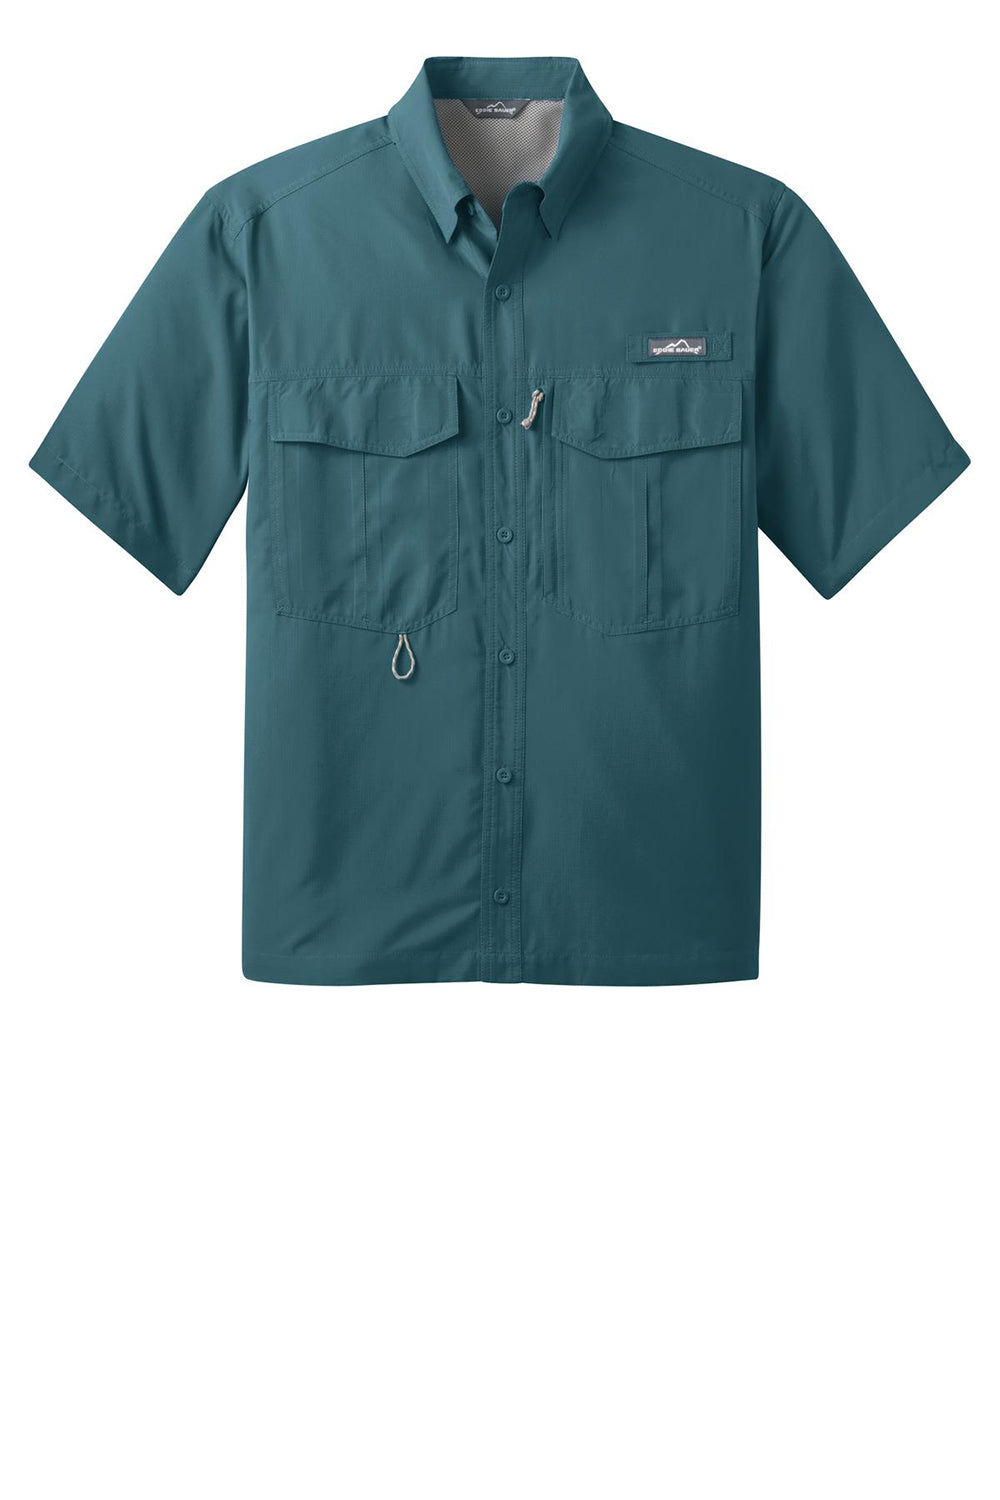 Eddie Bauer EB602 Mens Performance Fishing Moisture Wicking Short Sleeve Button Down Shirt w/ Double Pockets Gulf Teal Blue Flat Front